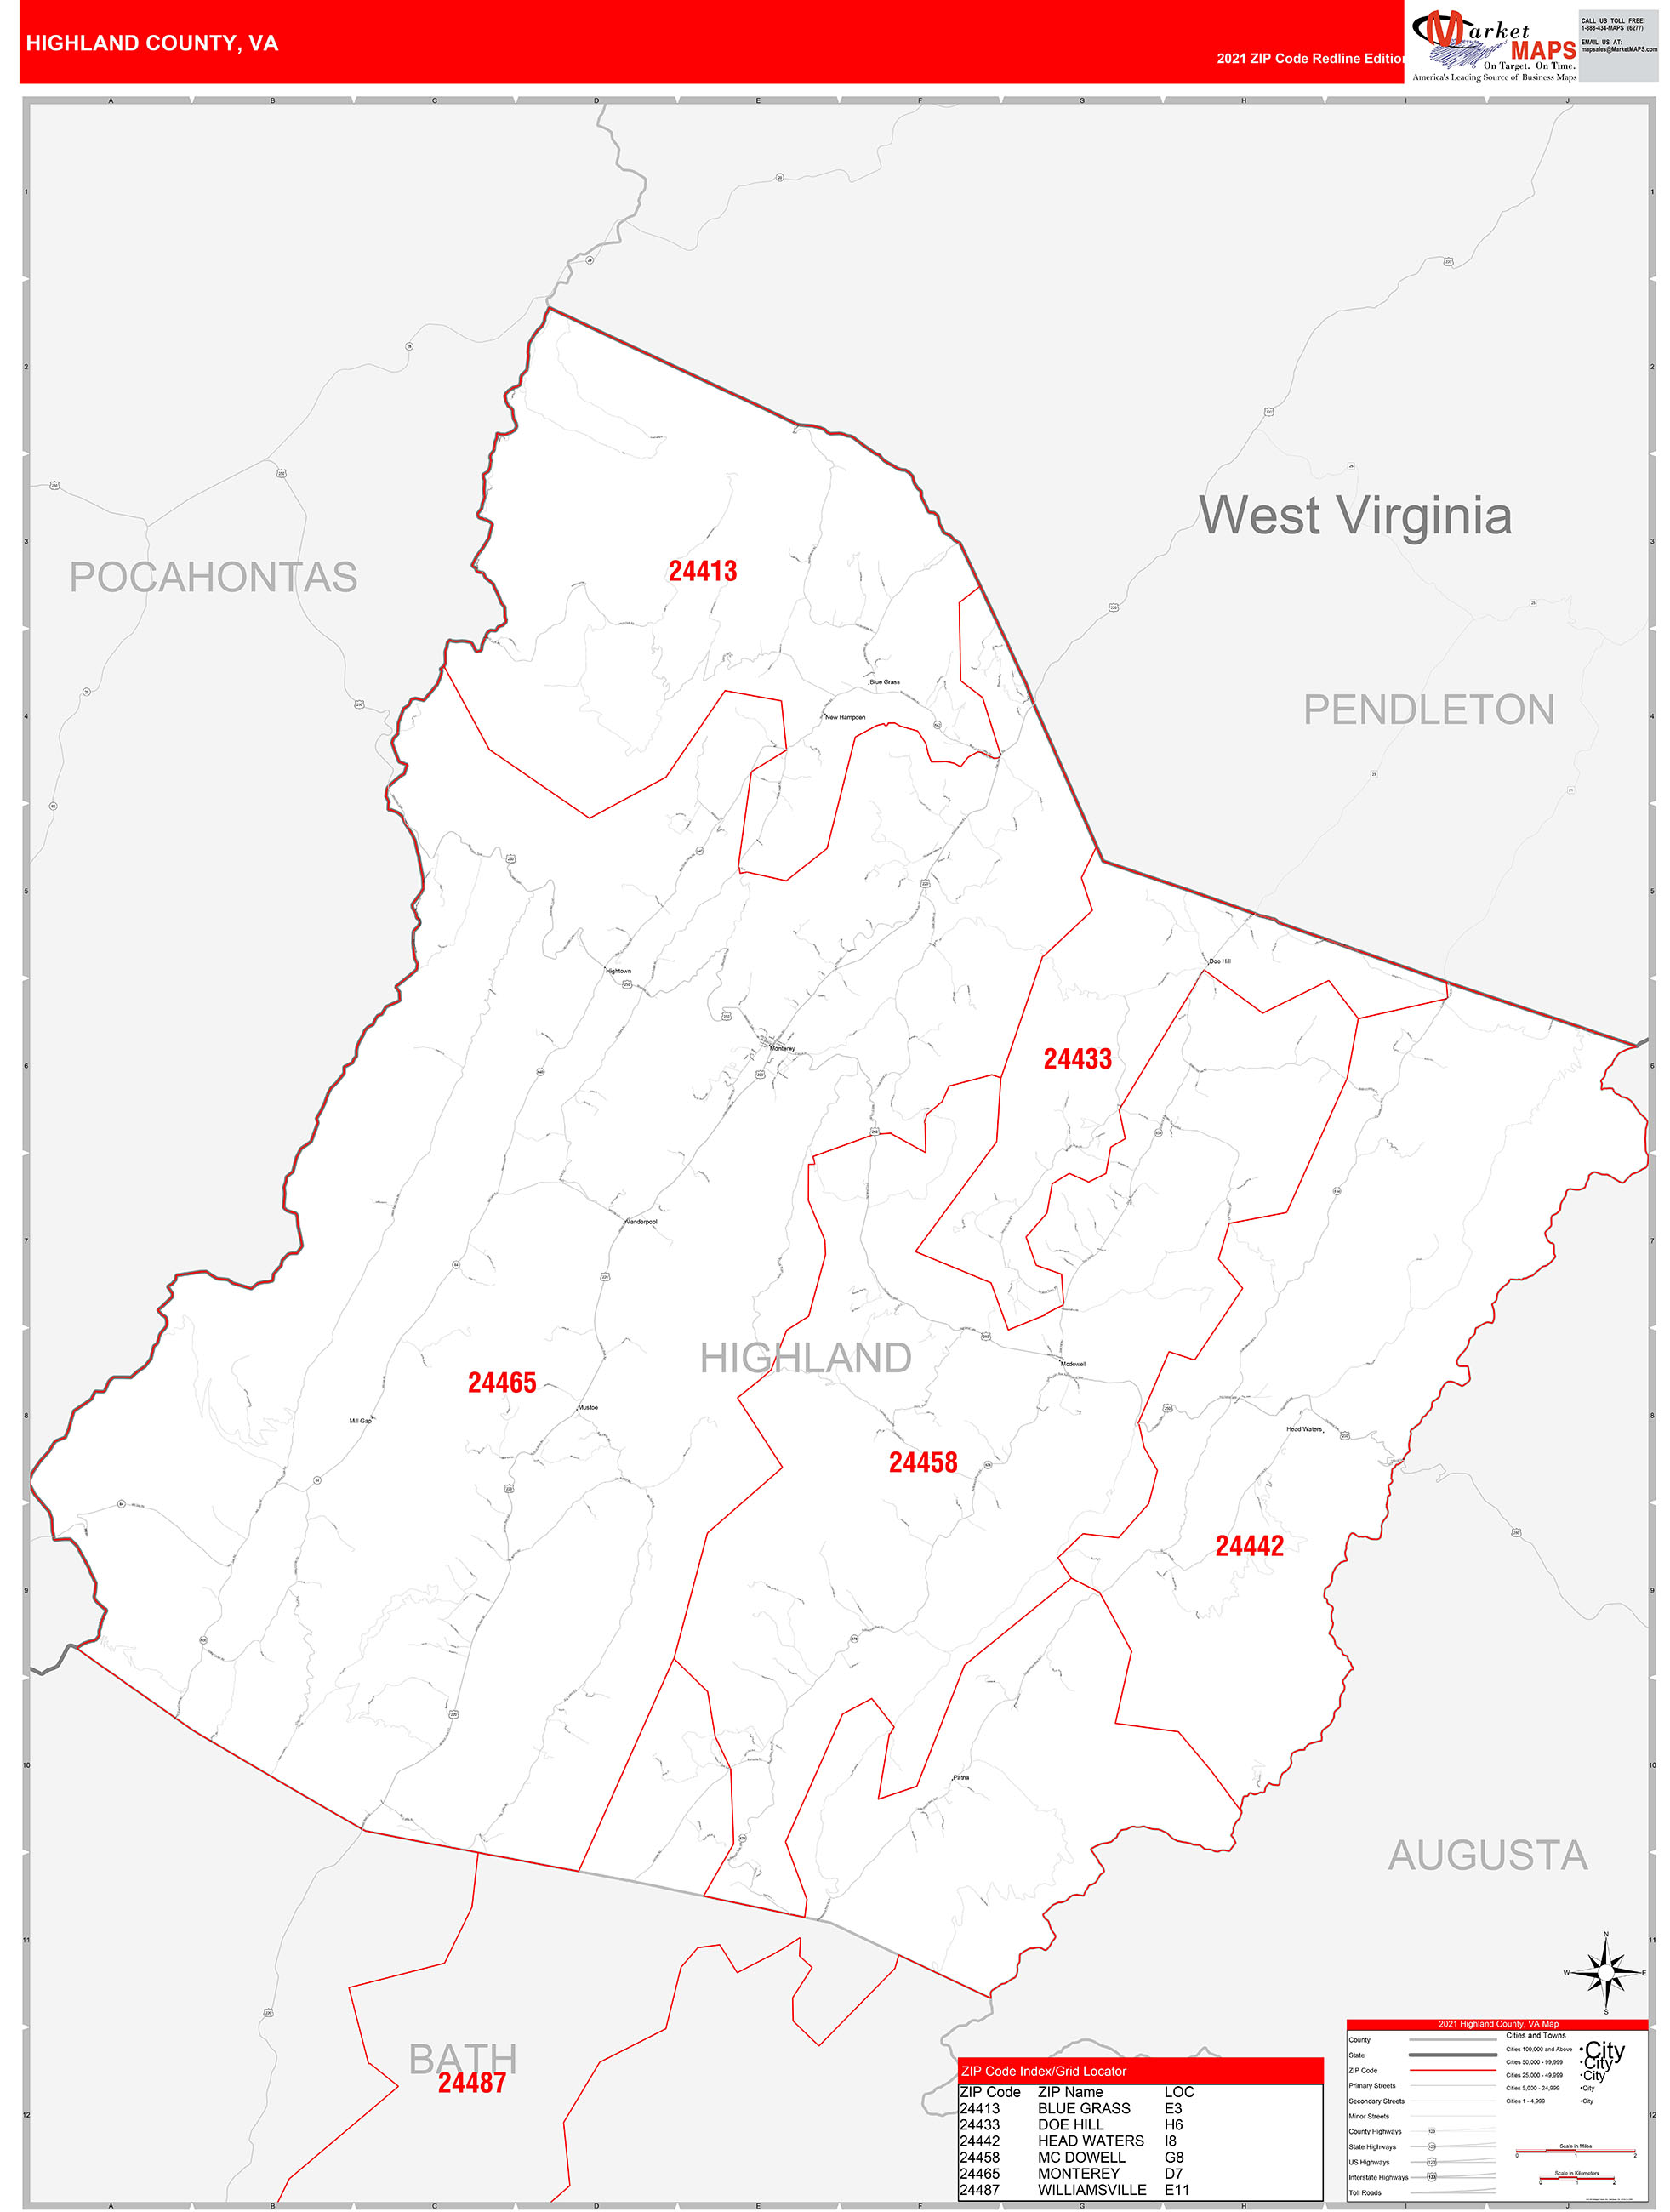 Highland County, VA Zip Code Wall Map Red Line Style by MarketMAPS